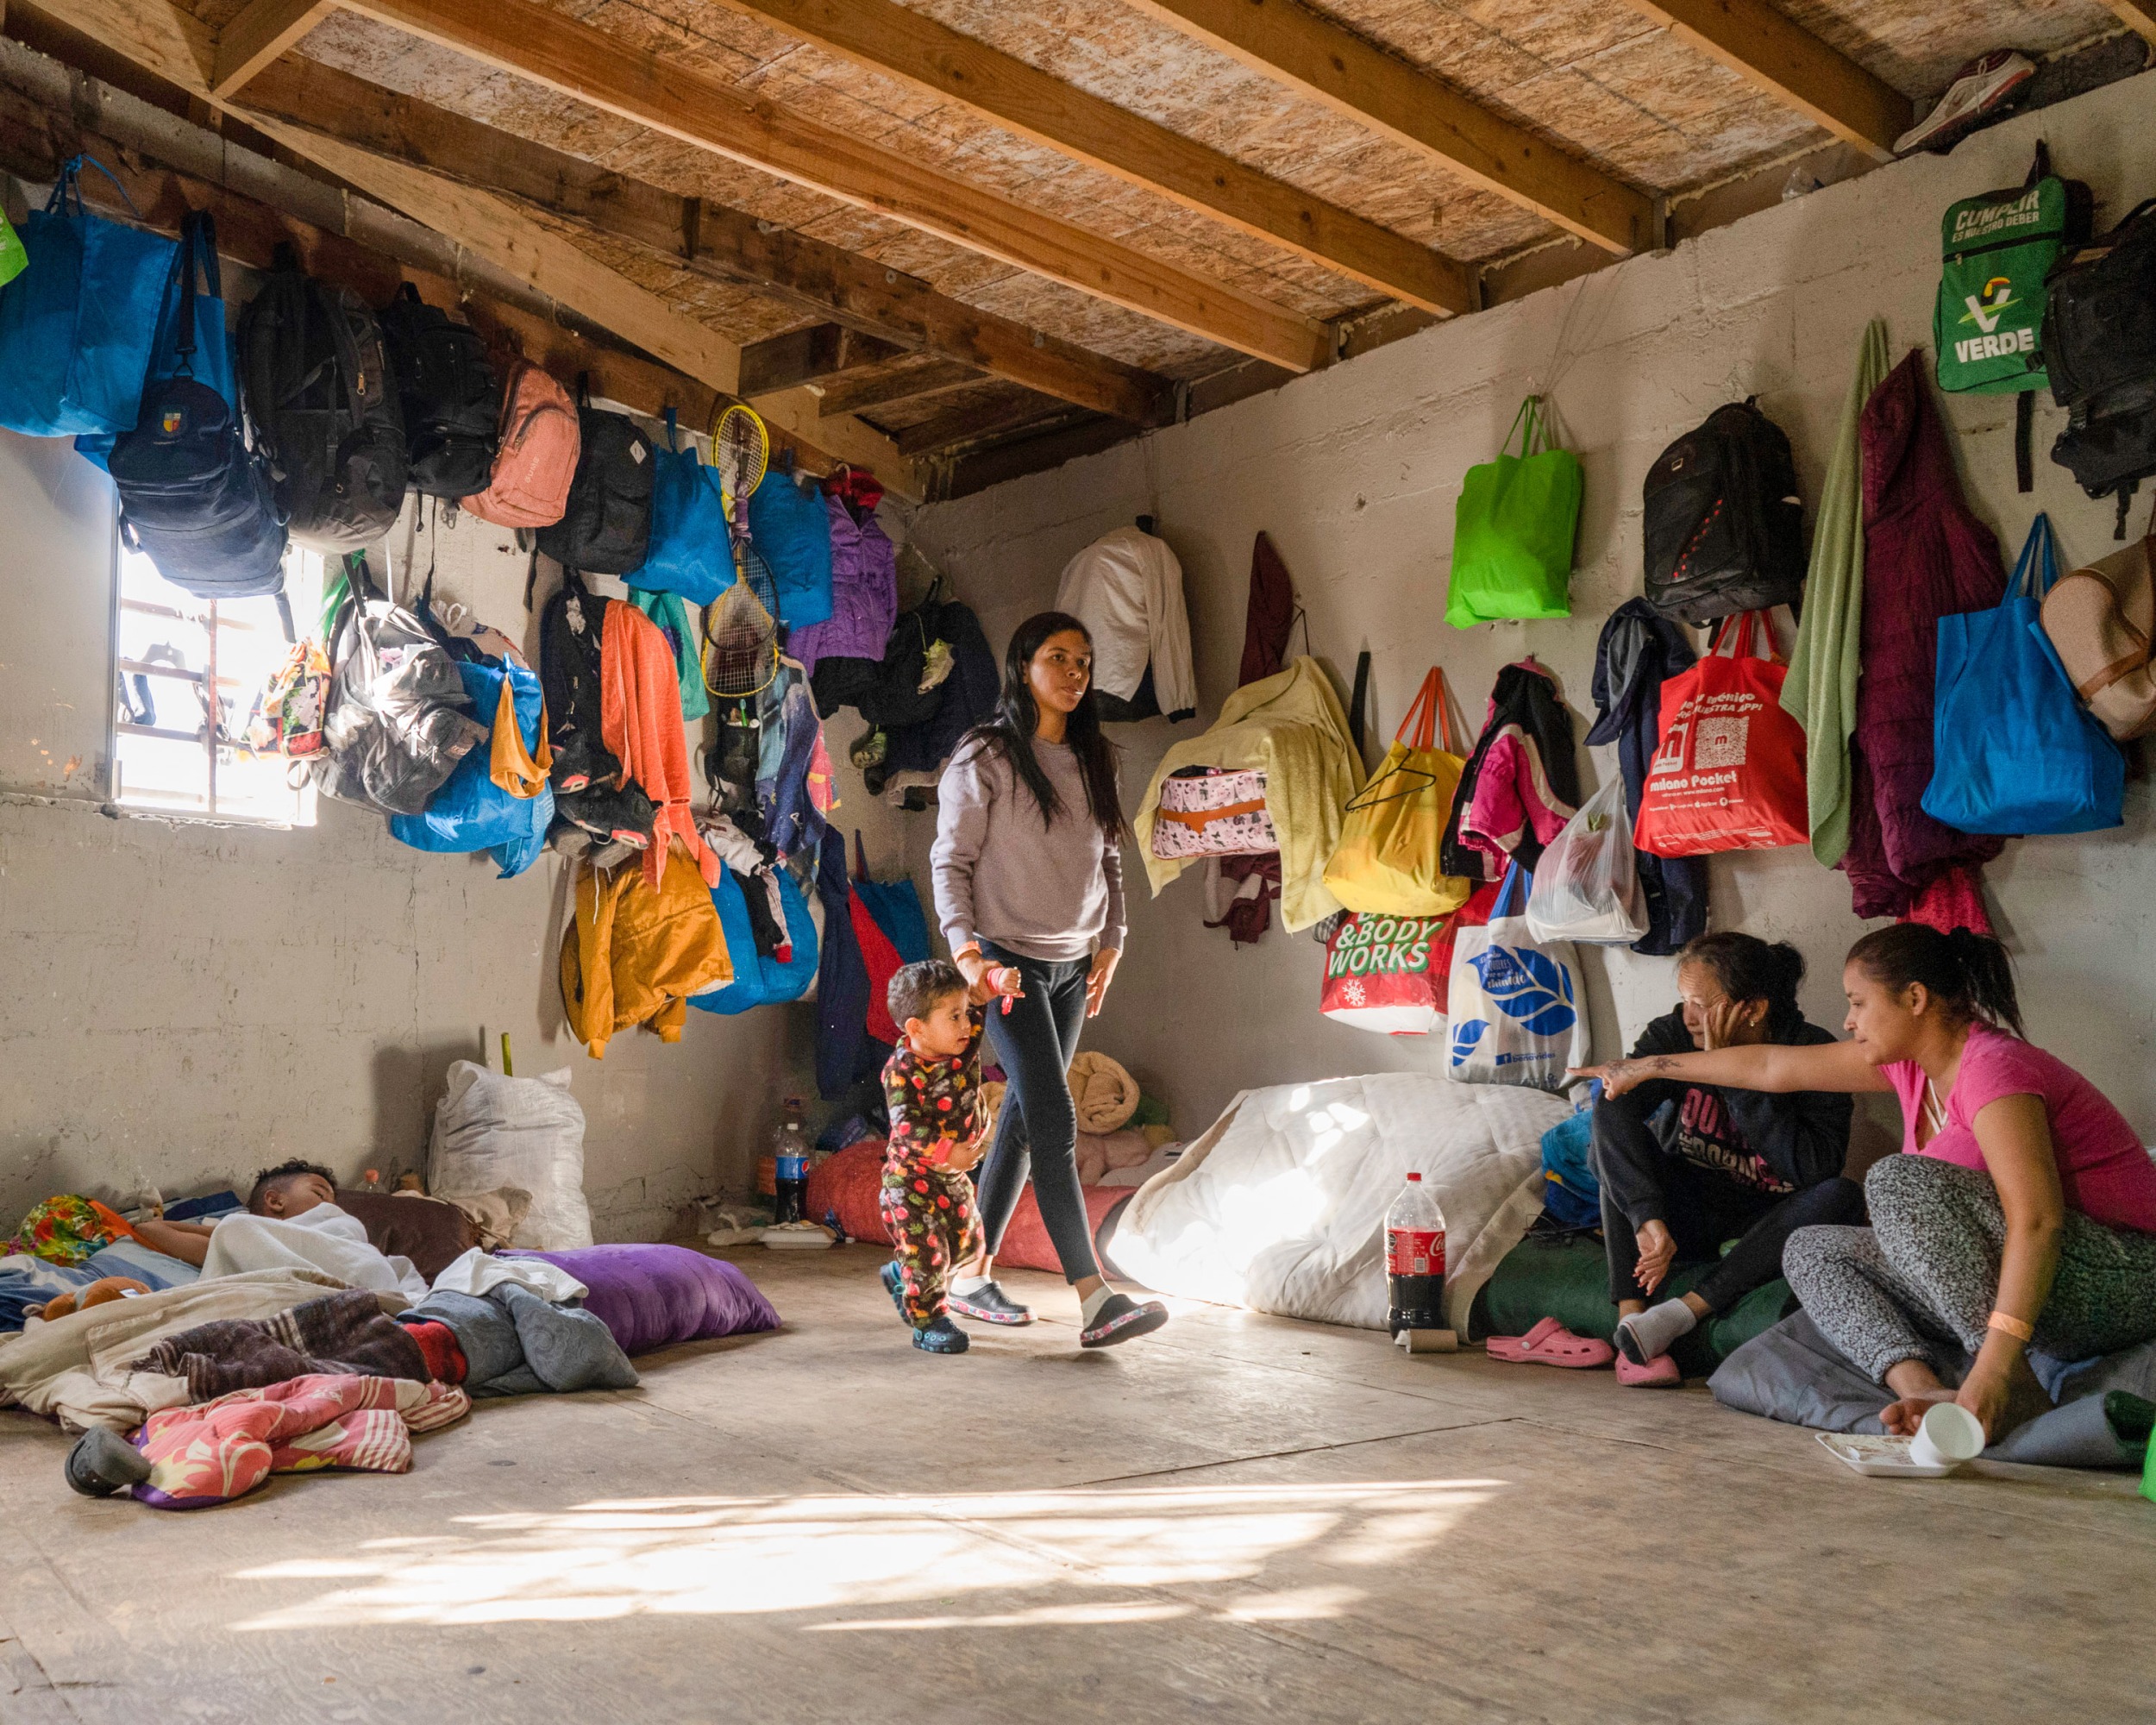 a woman leads her son through a room where people and belongings are up against a wall